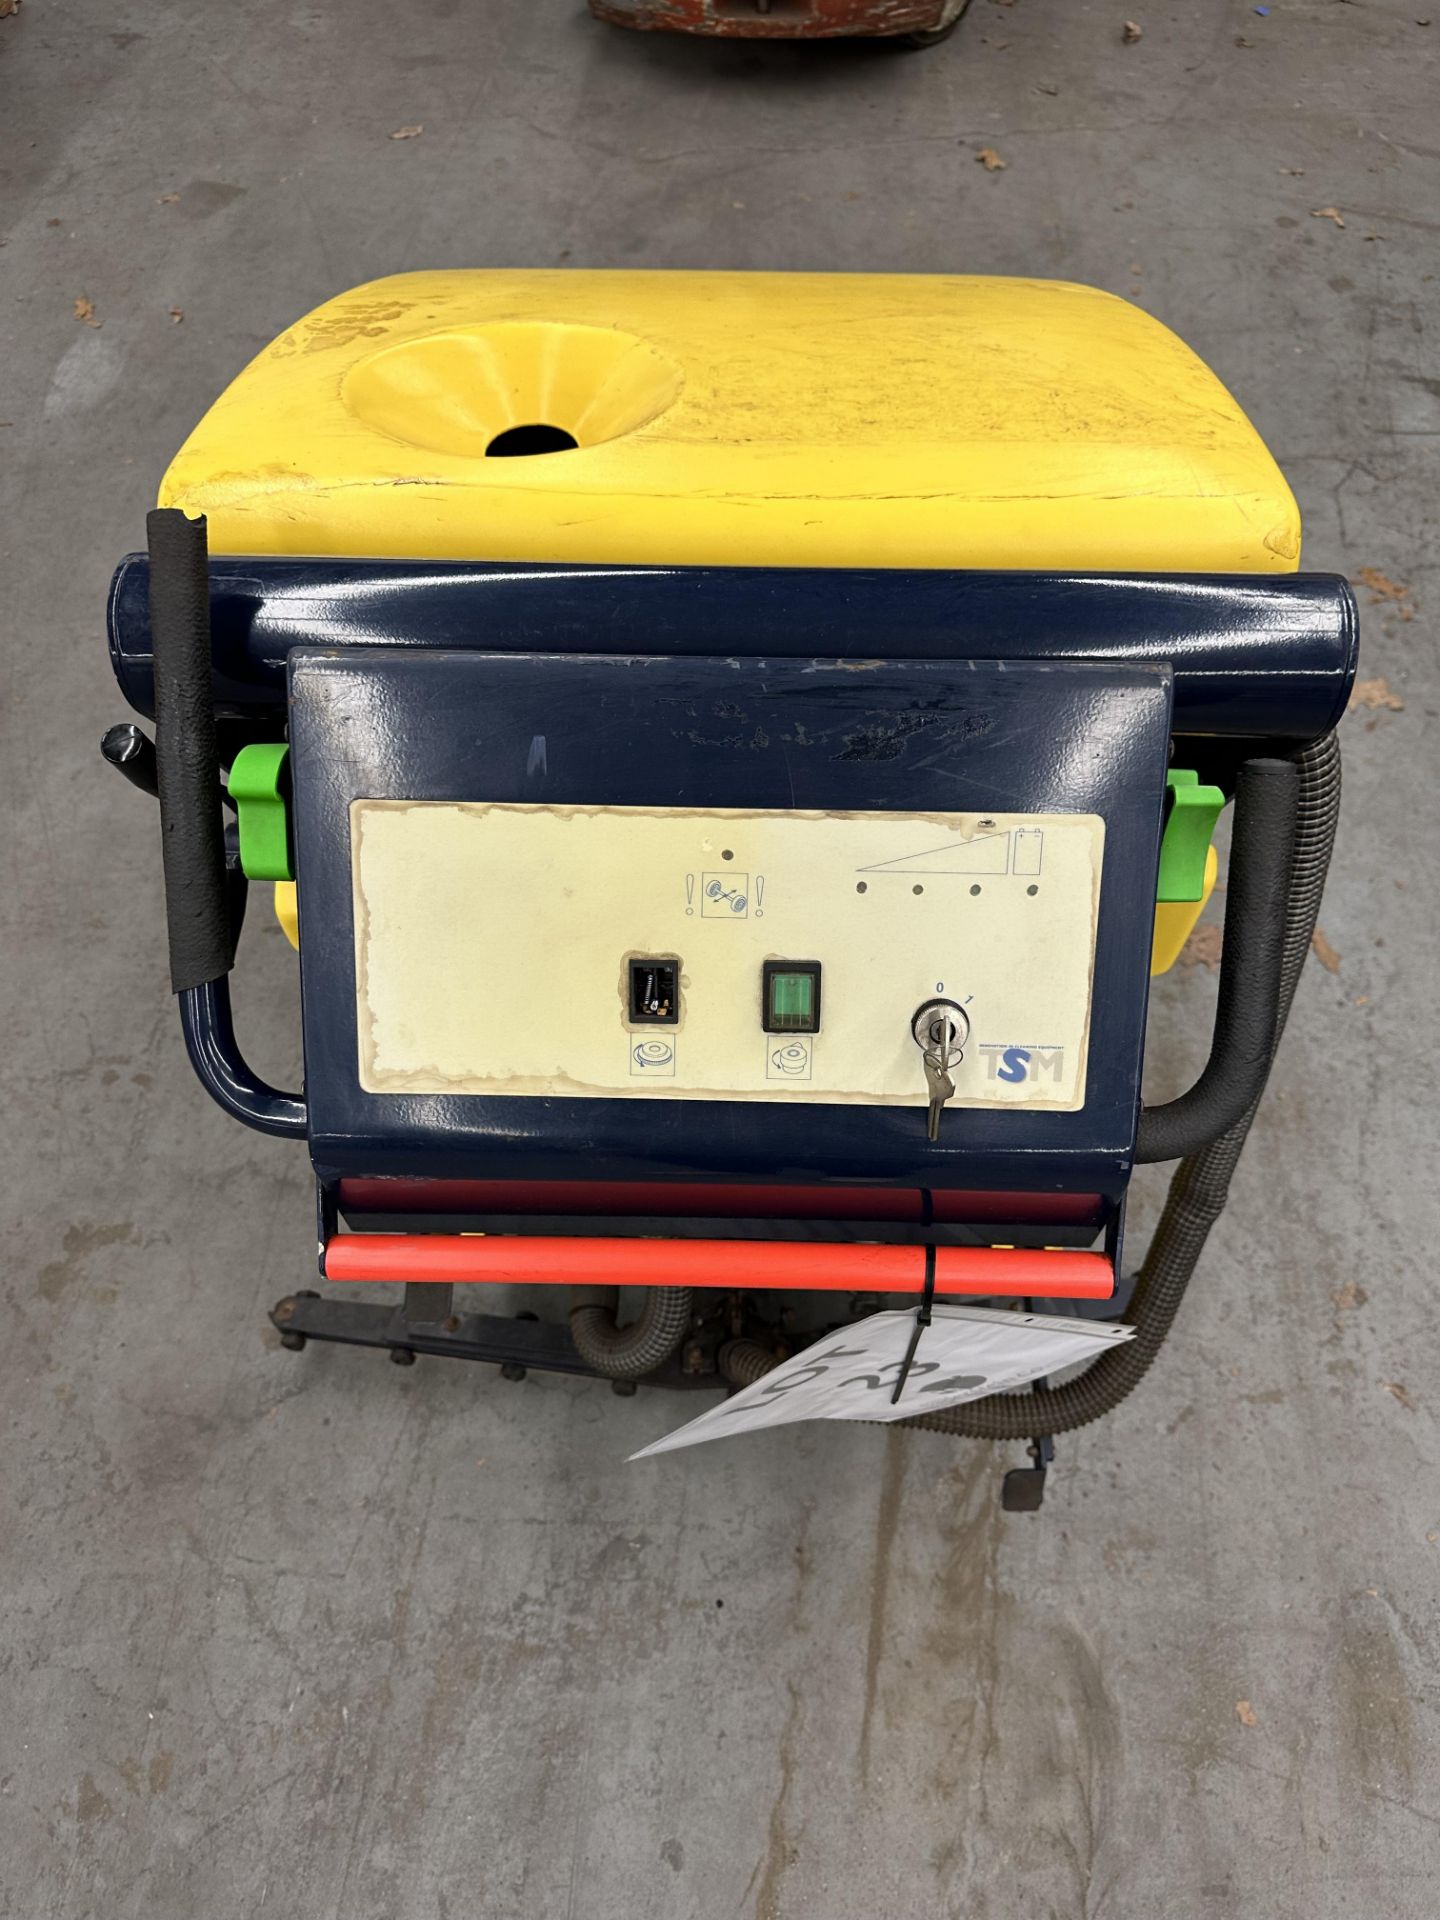 TSM Industrial Floor Cleaning Machine w/(2) 36V (3 x12) Batteries (NO FURTHER INFO) (WILL POST VIDEO - Image 3 of 4